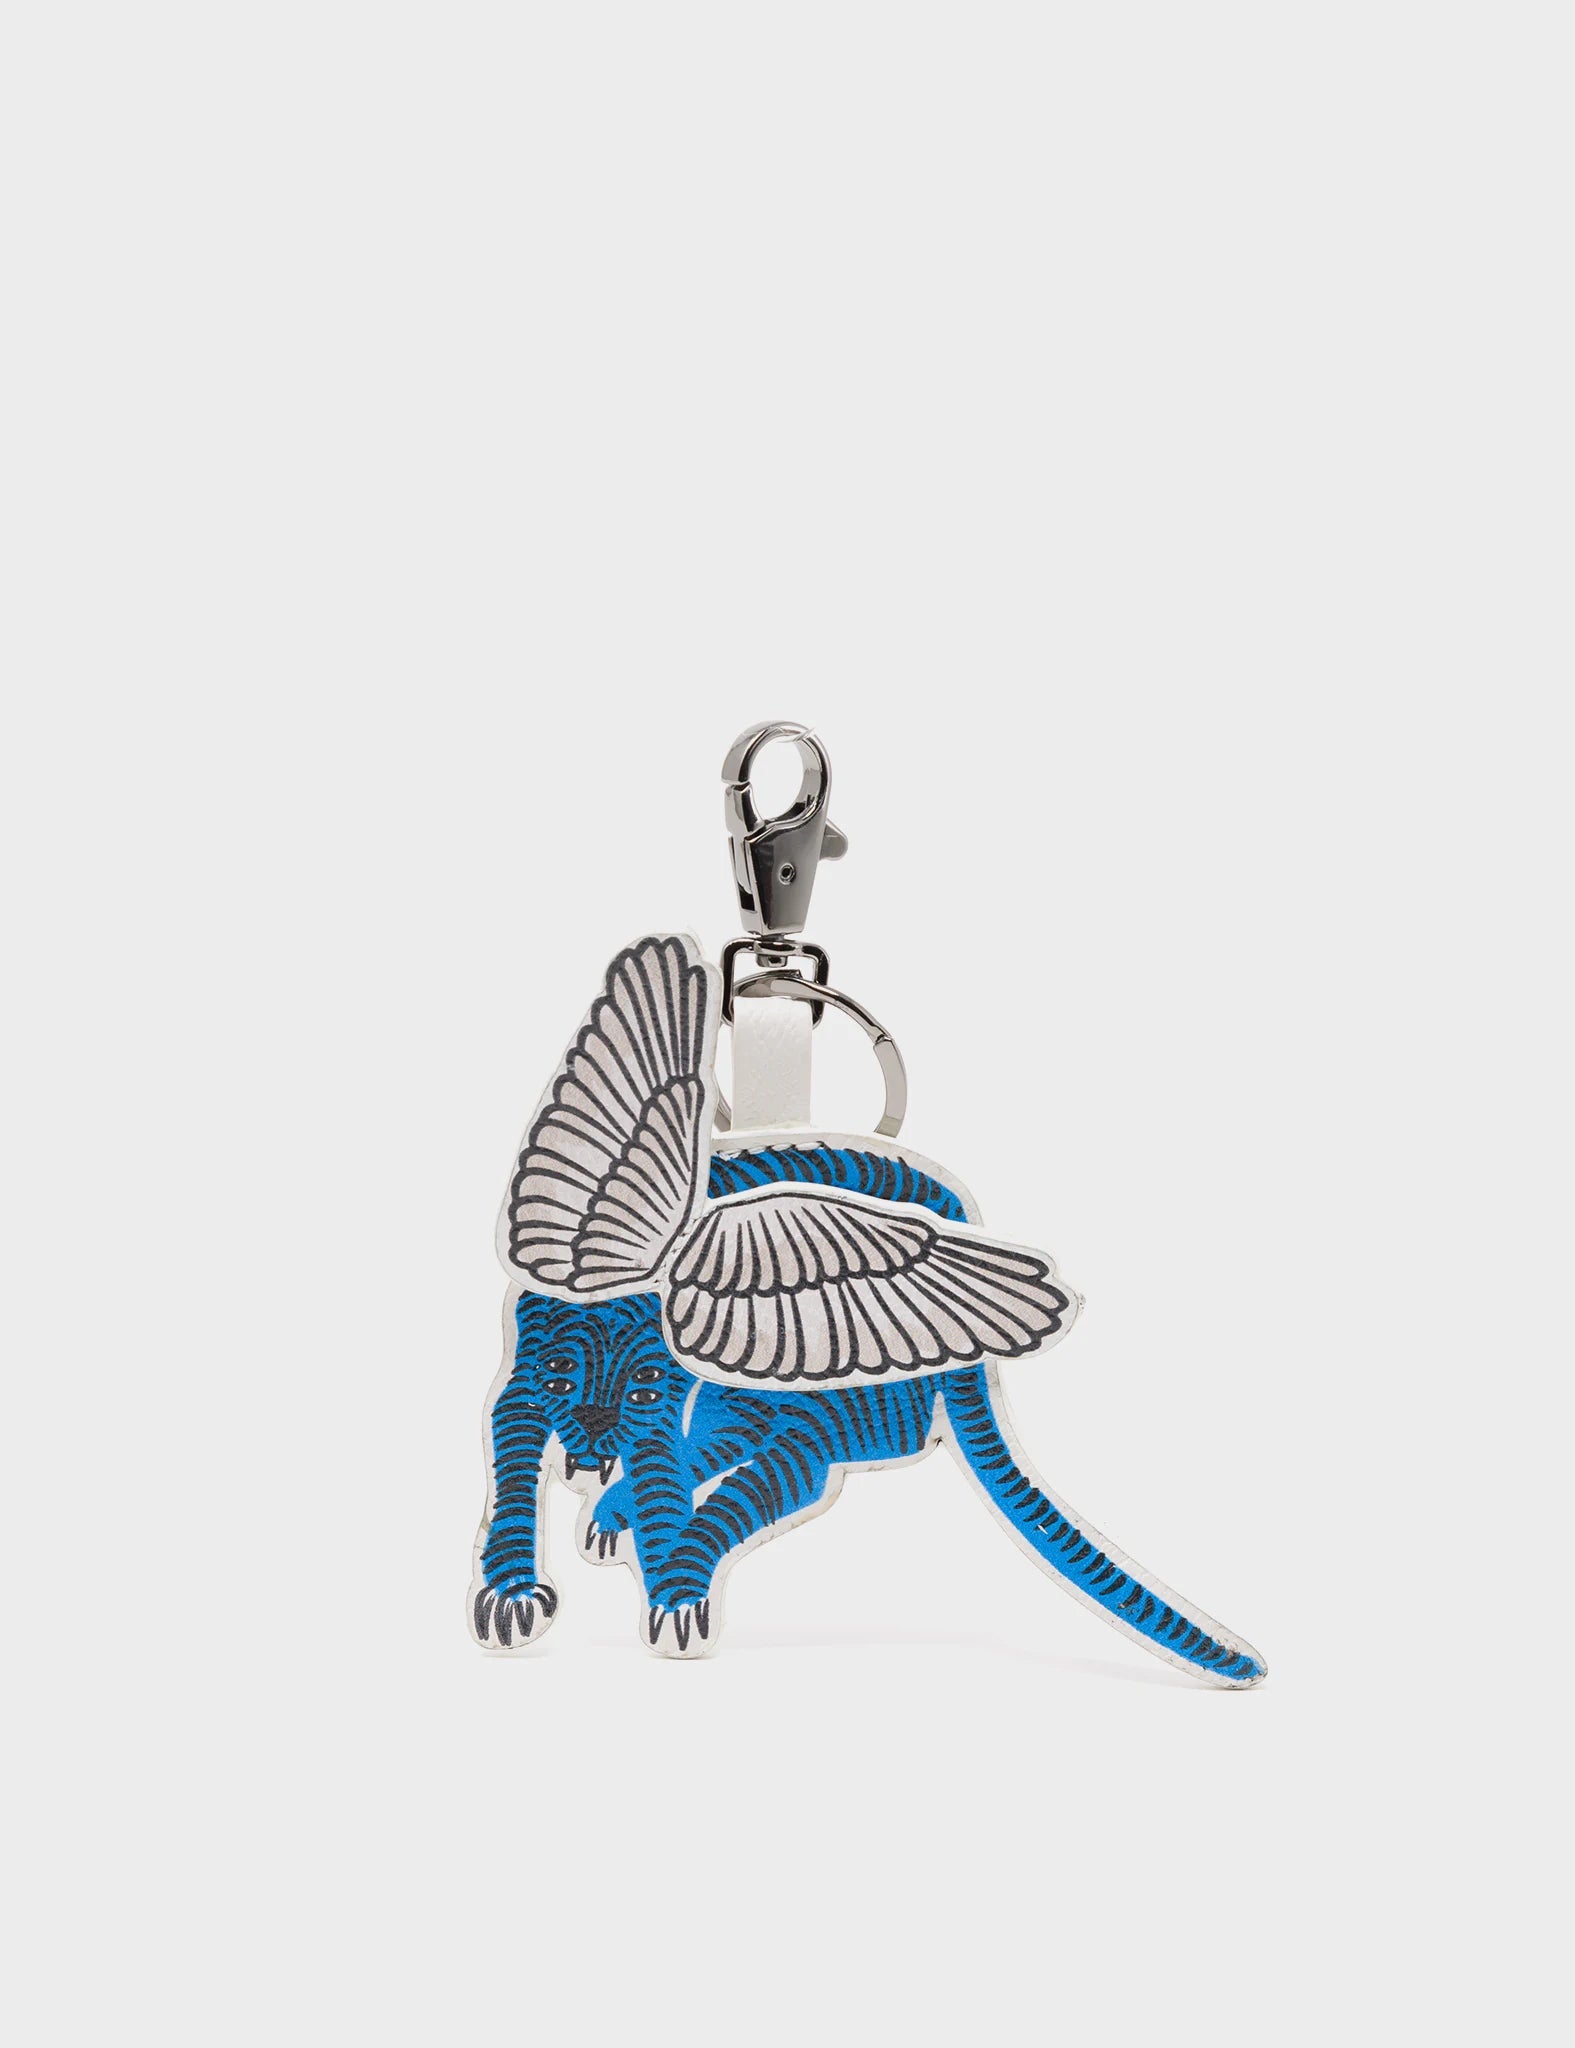 Winged Tiger Leather Keychain - Blue Leather